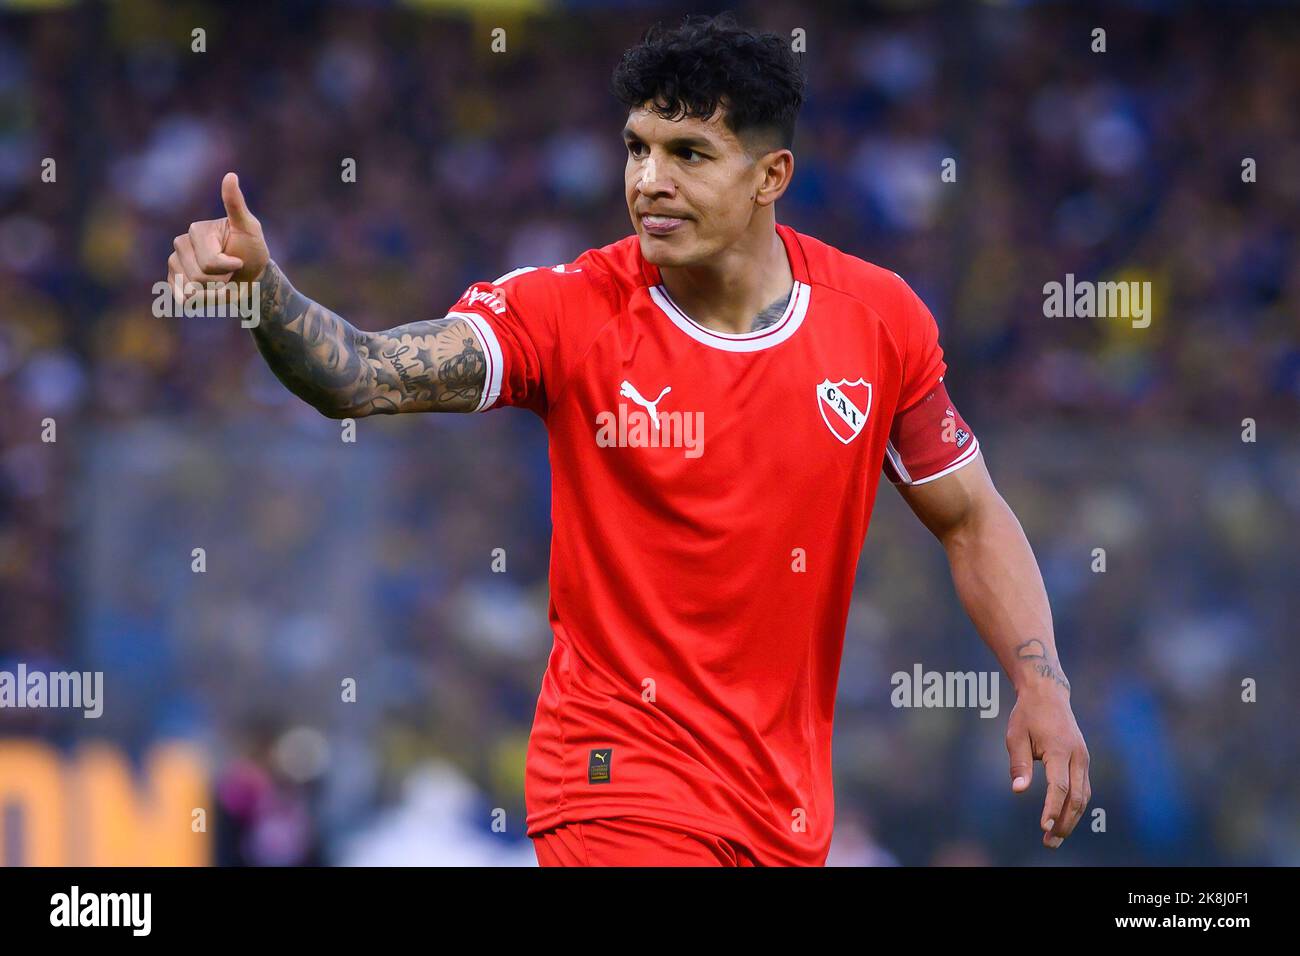 Buenos Aires, Argentina. 23rd Oct, 2022. Lucas Romero of Independiente gestures during a match between Boca Juniors and Independiente as part of Liga Profesional 2022 at Estadio Alberto J. Armando. (Final Score; Boca Juniors 2:2 Independiente ) Credit: SOPA Images Limited/Alamy Live News Stock Photo